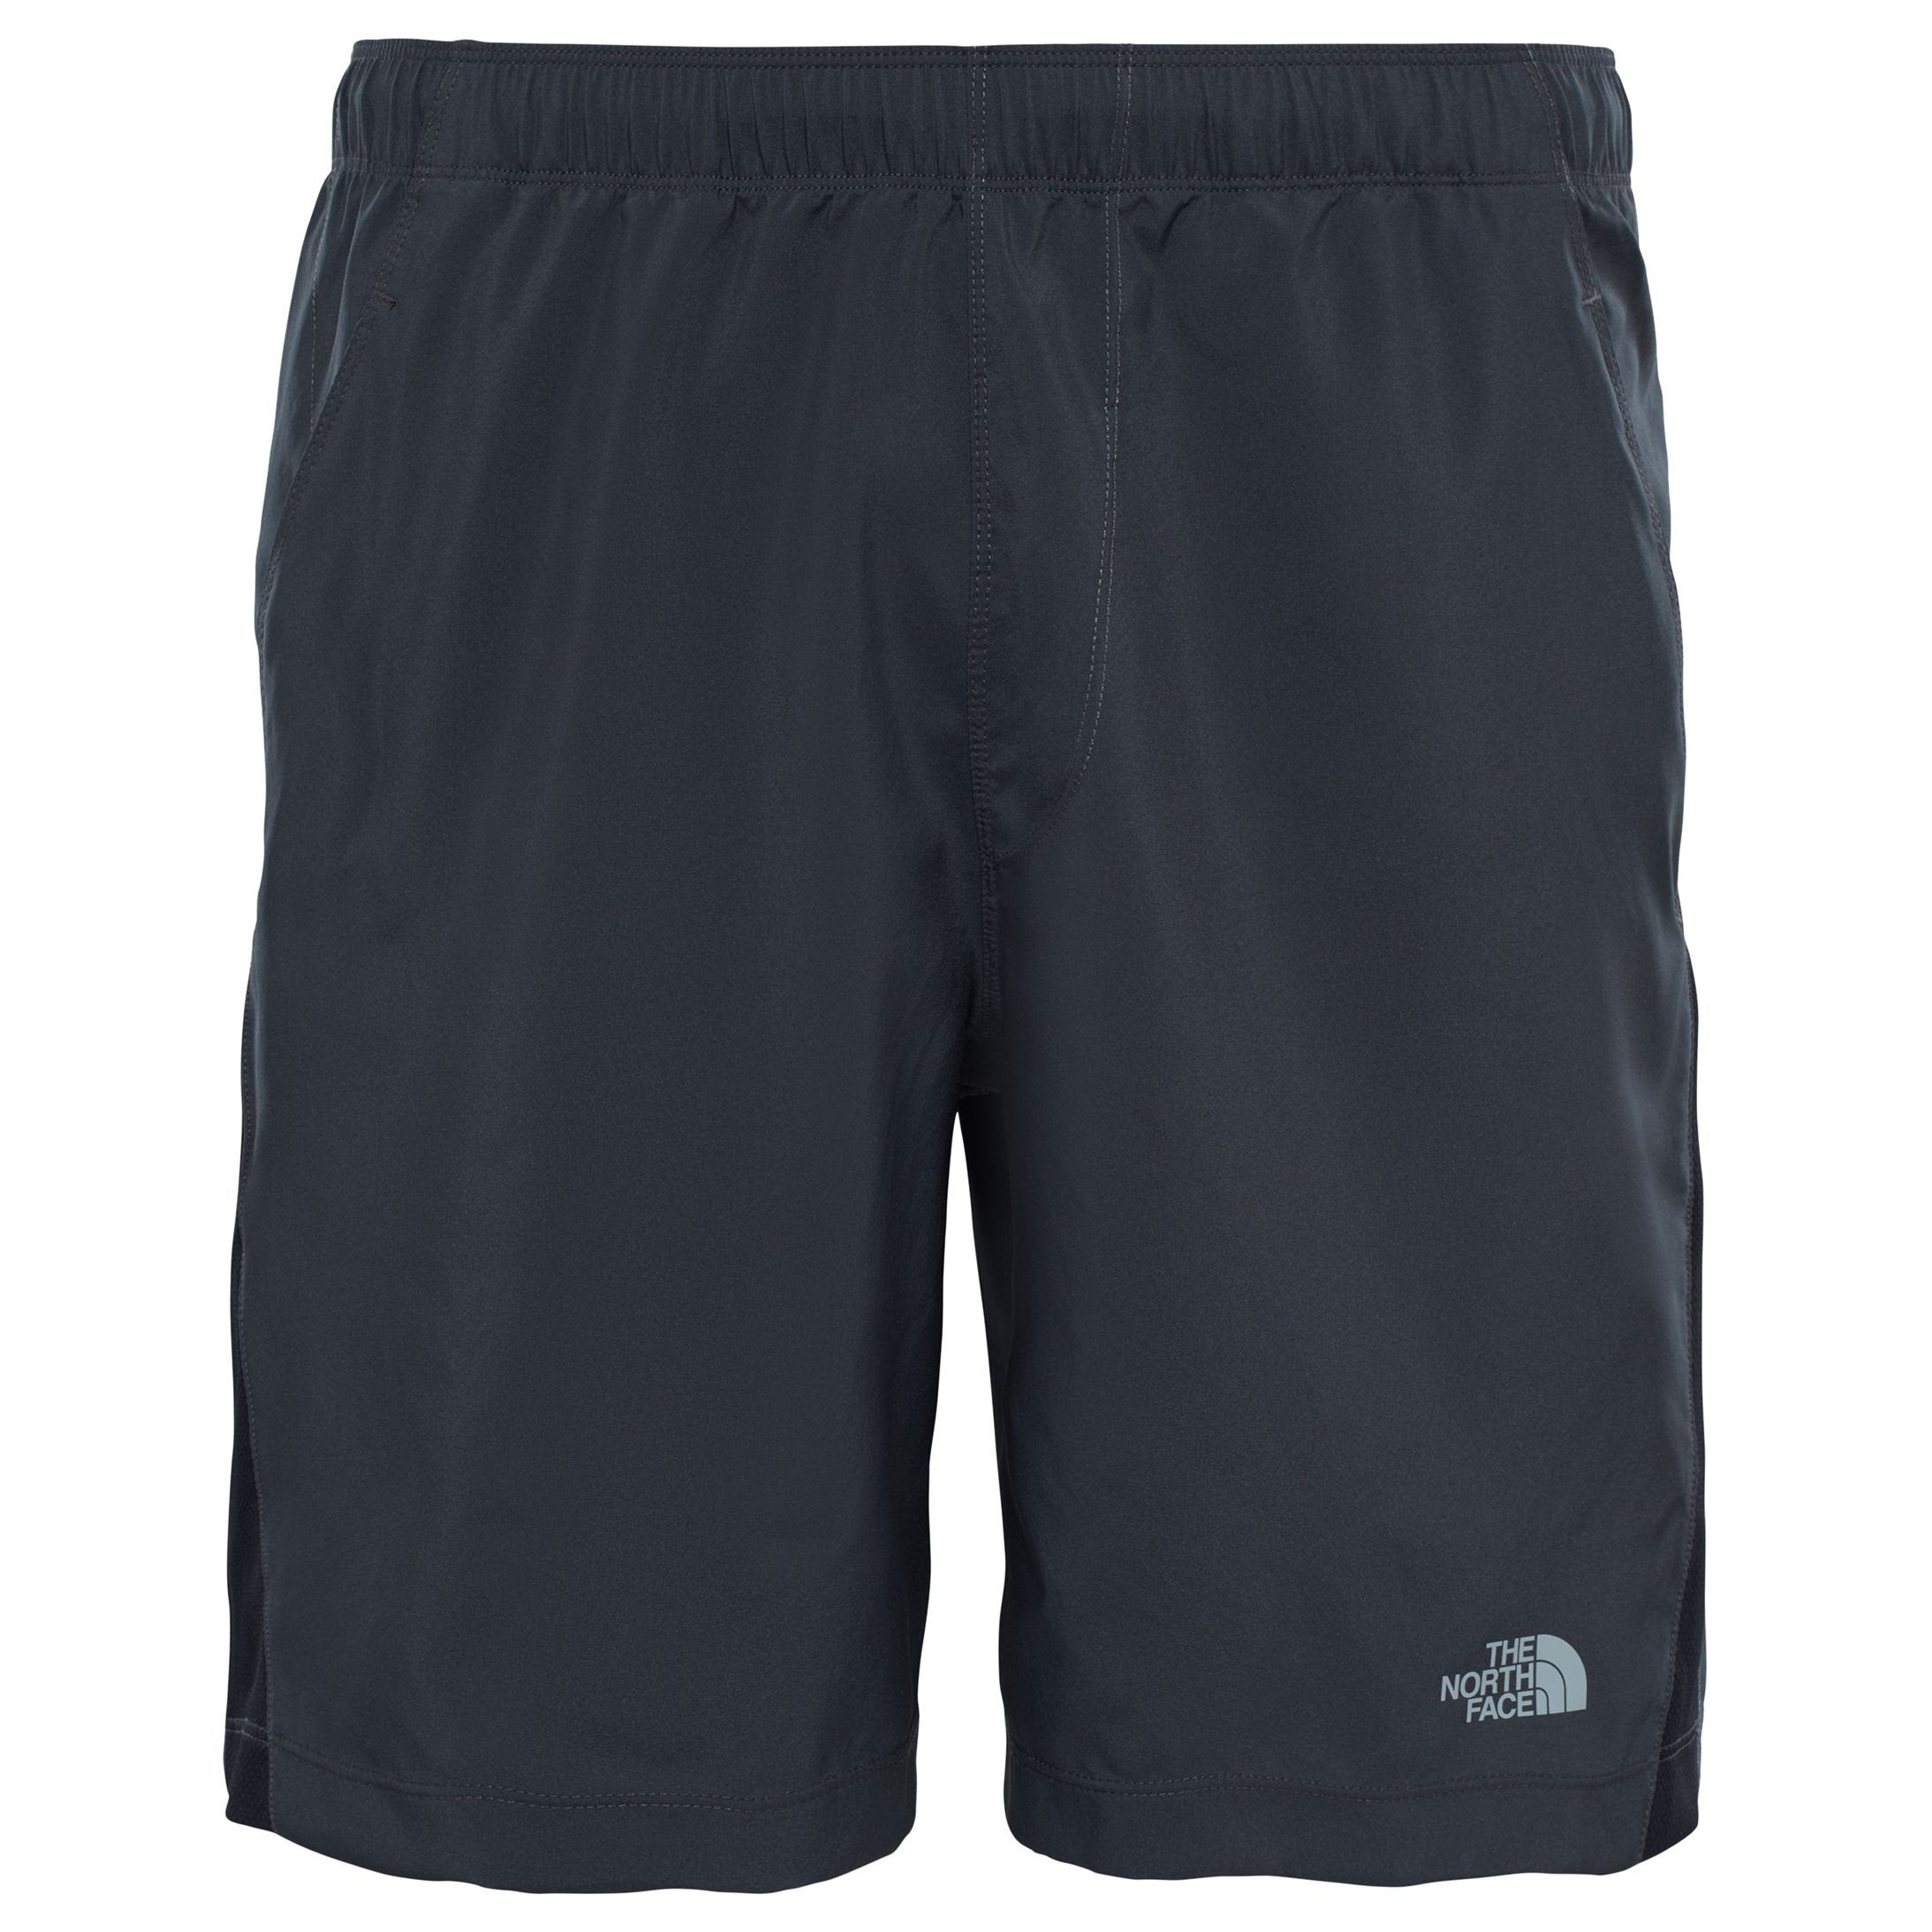 The North Face Reactor Shorts, Grey, L